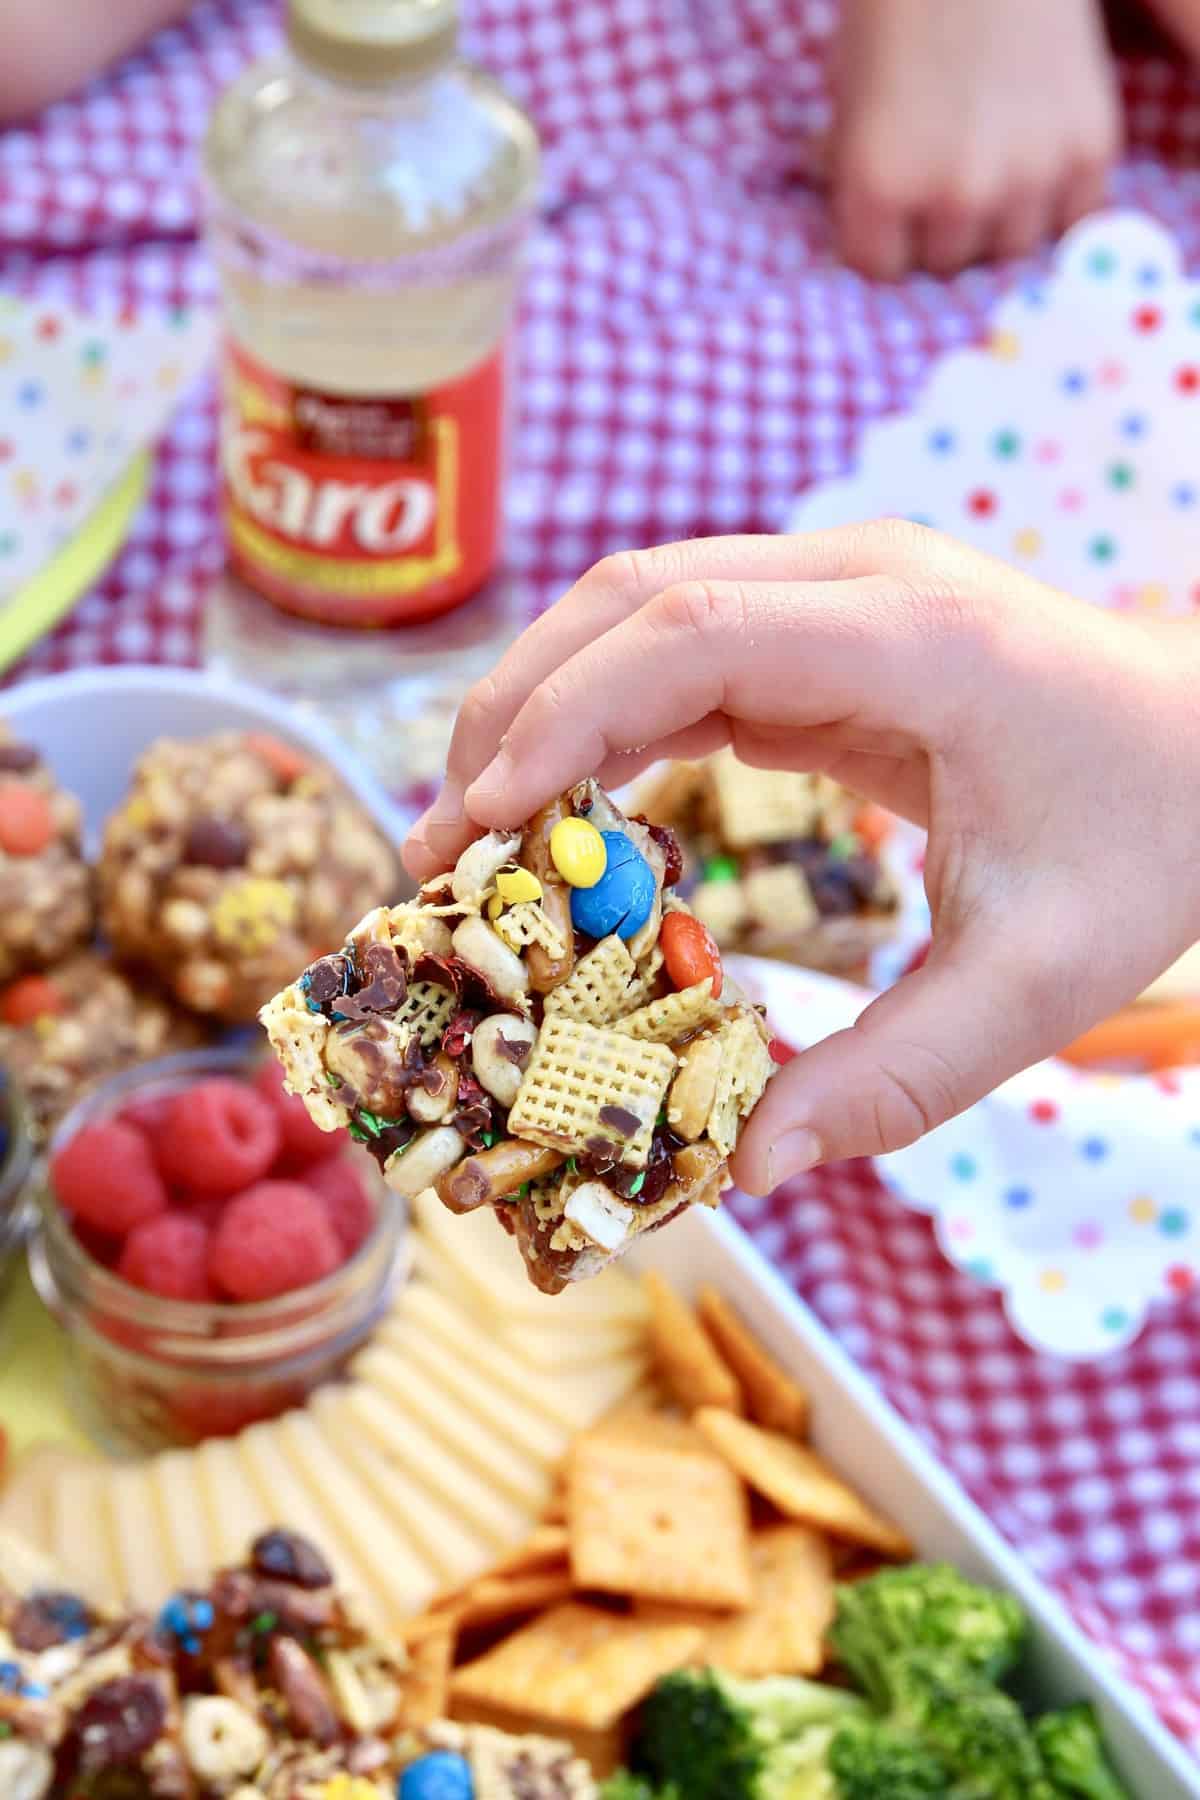 Summer Picnic Snack Tray by The BakerMama